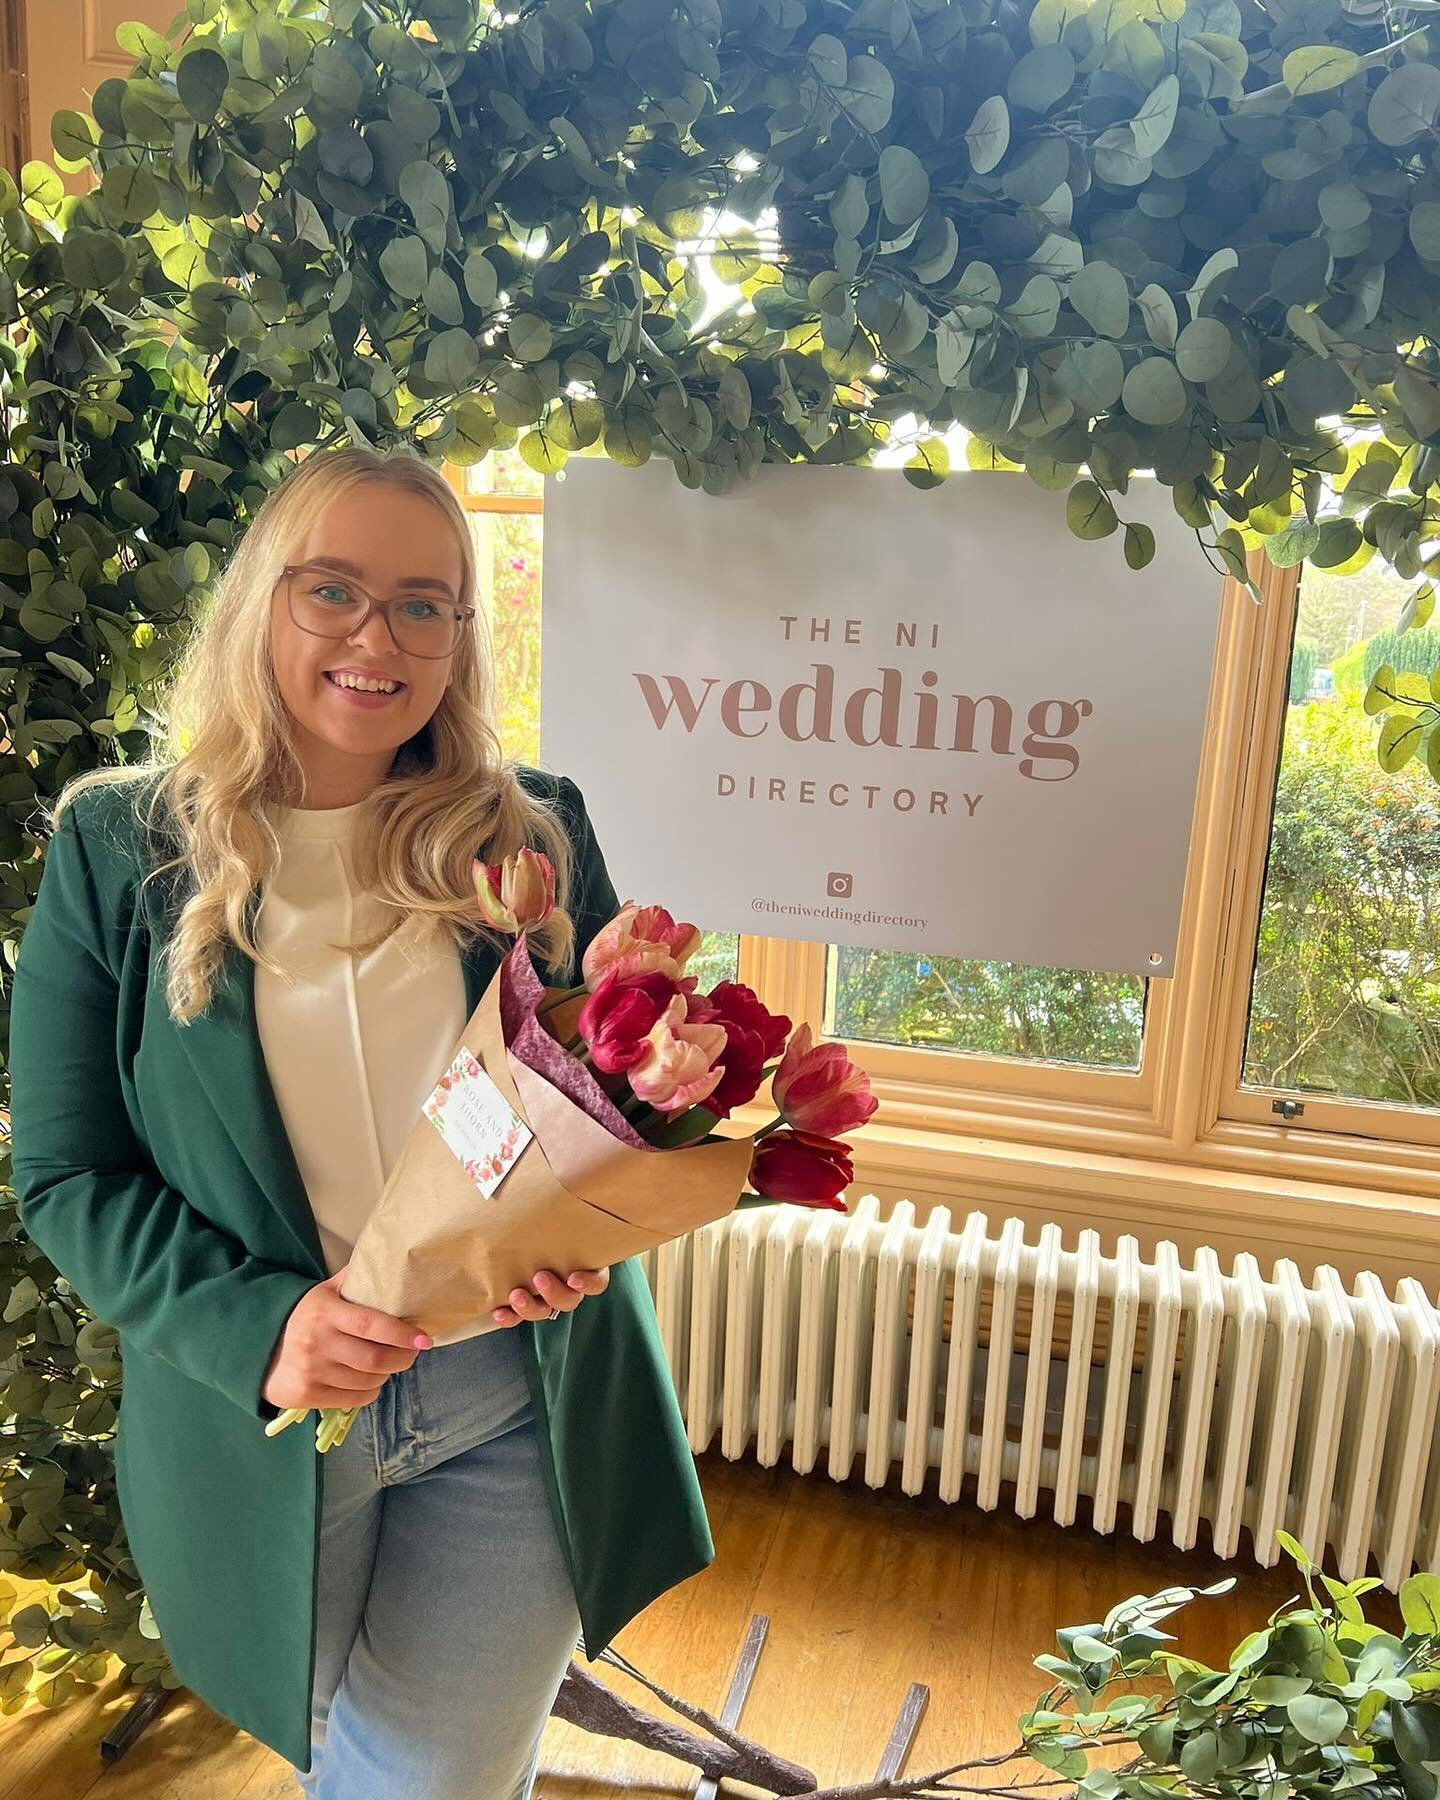 The most beautiful flowers from @roseandthornco.armagh 🤍

If you&rsquo;re looking for wedding flowers, head over to their page on The NI Wedding Directory and check out their work. Totally gorgeous! 

Backdrop from the one and only @winterberryweddi